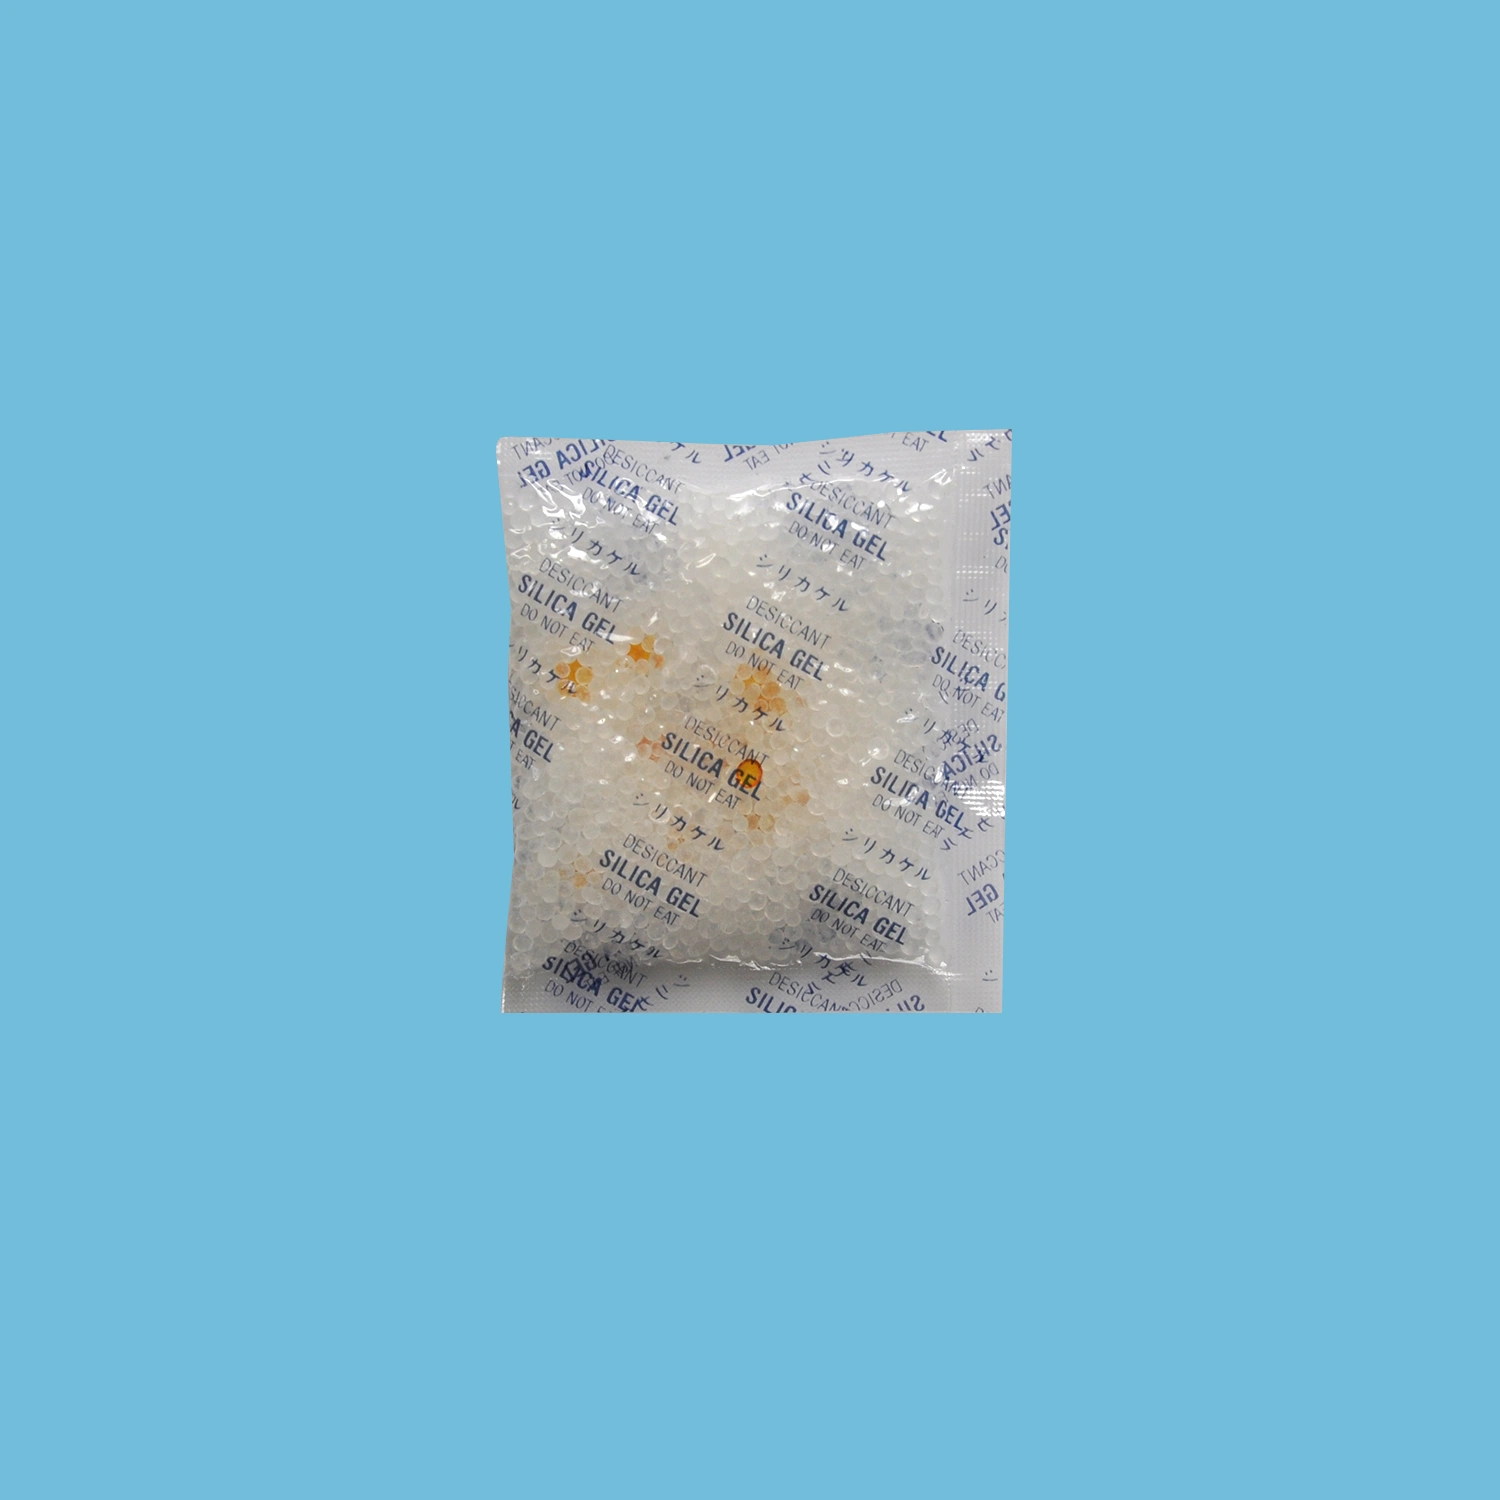 Best Price Powerful Moisture Absorber Silica Gel Desiccant